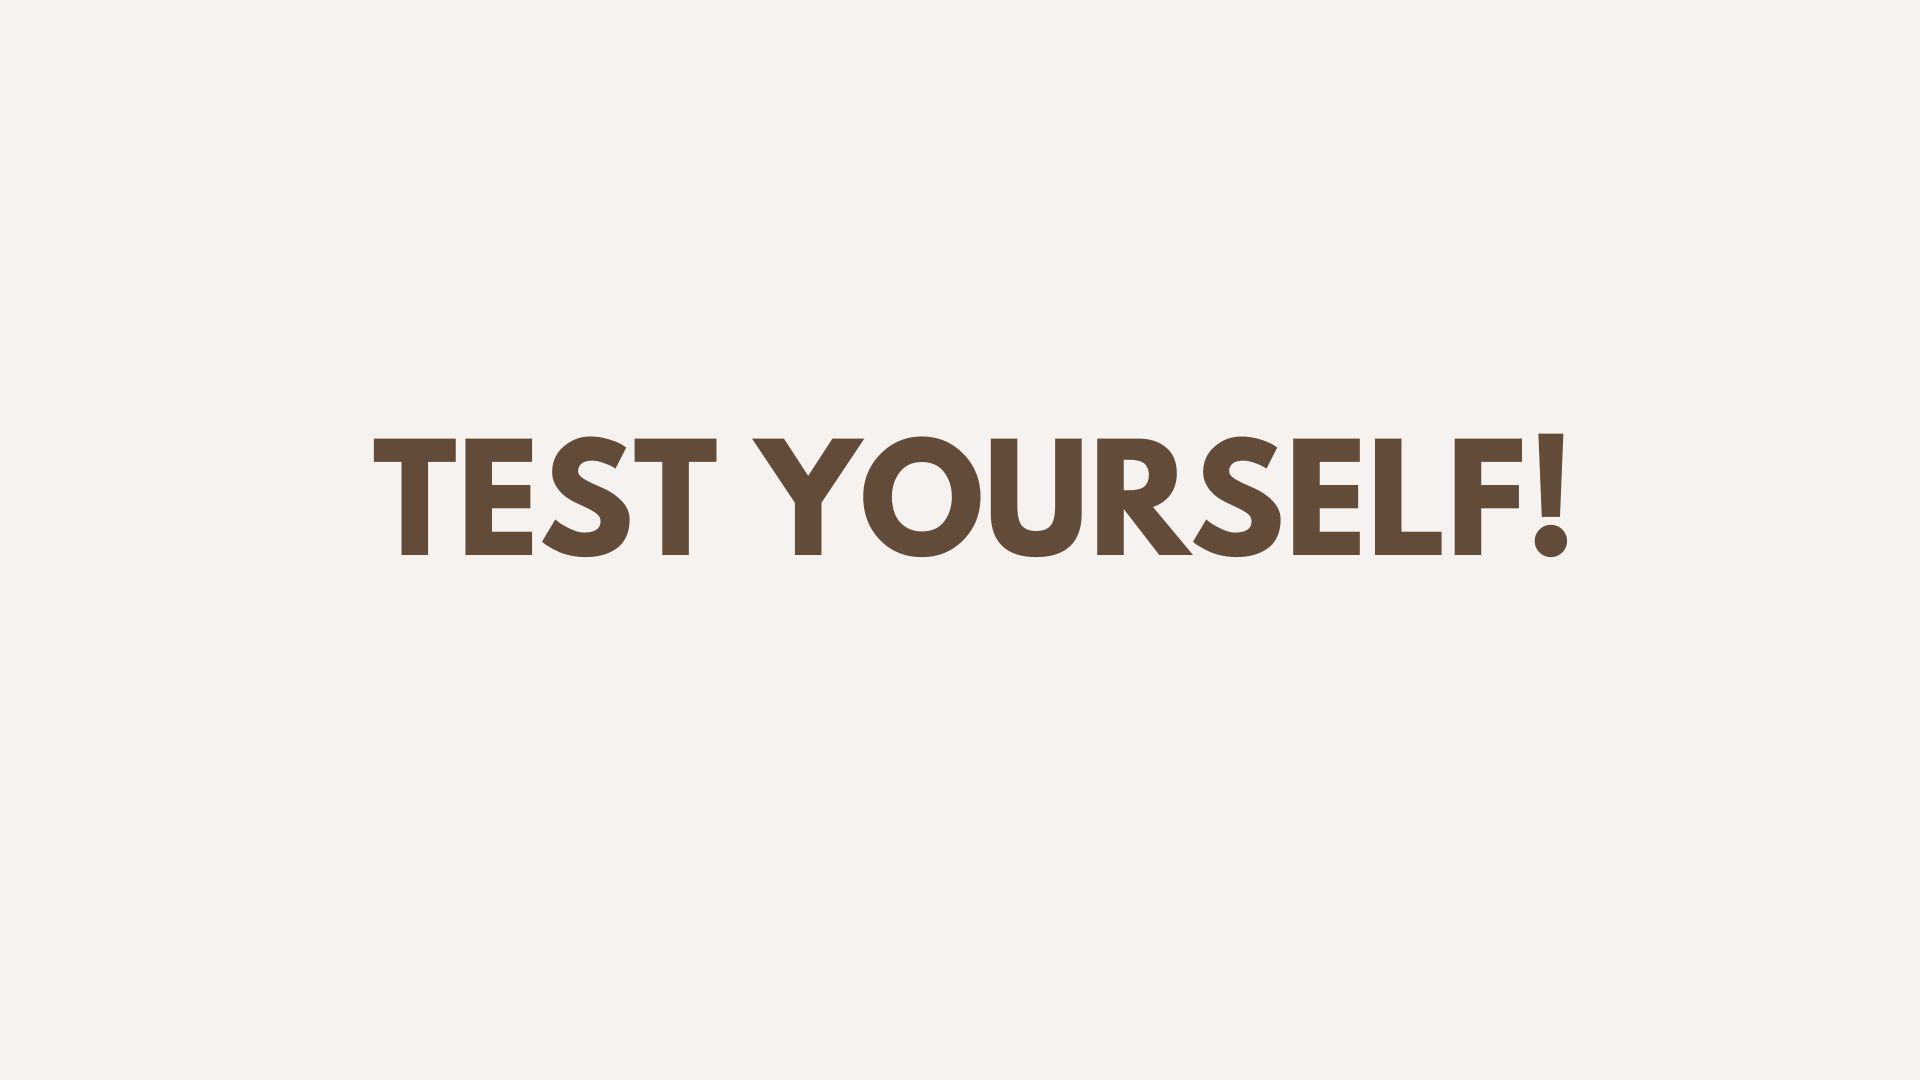 TEST YOURSELF! Course - 1